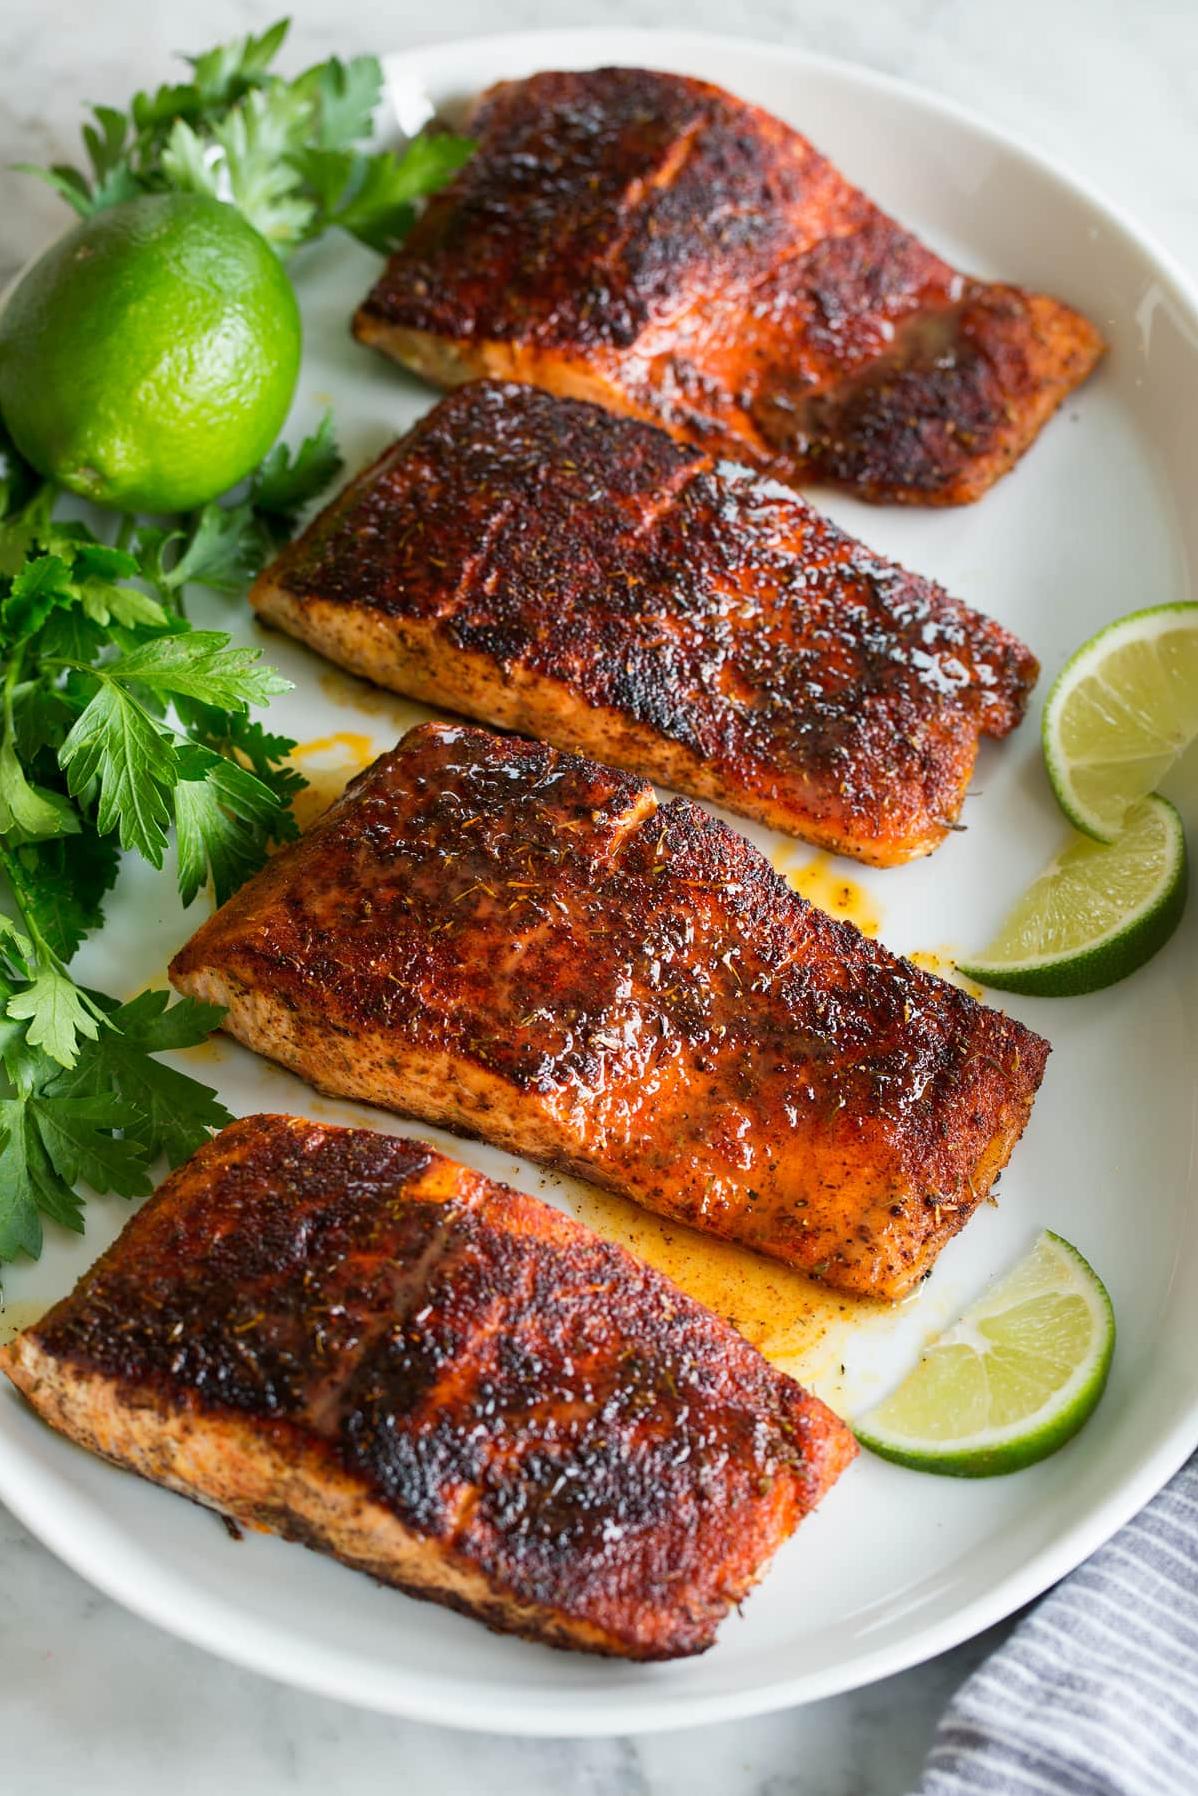  Get your grill game on with this savory blackened salmon!